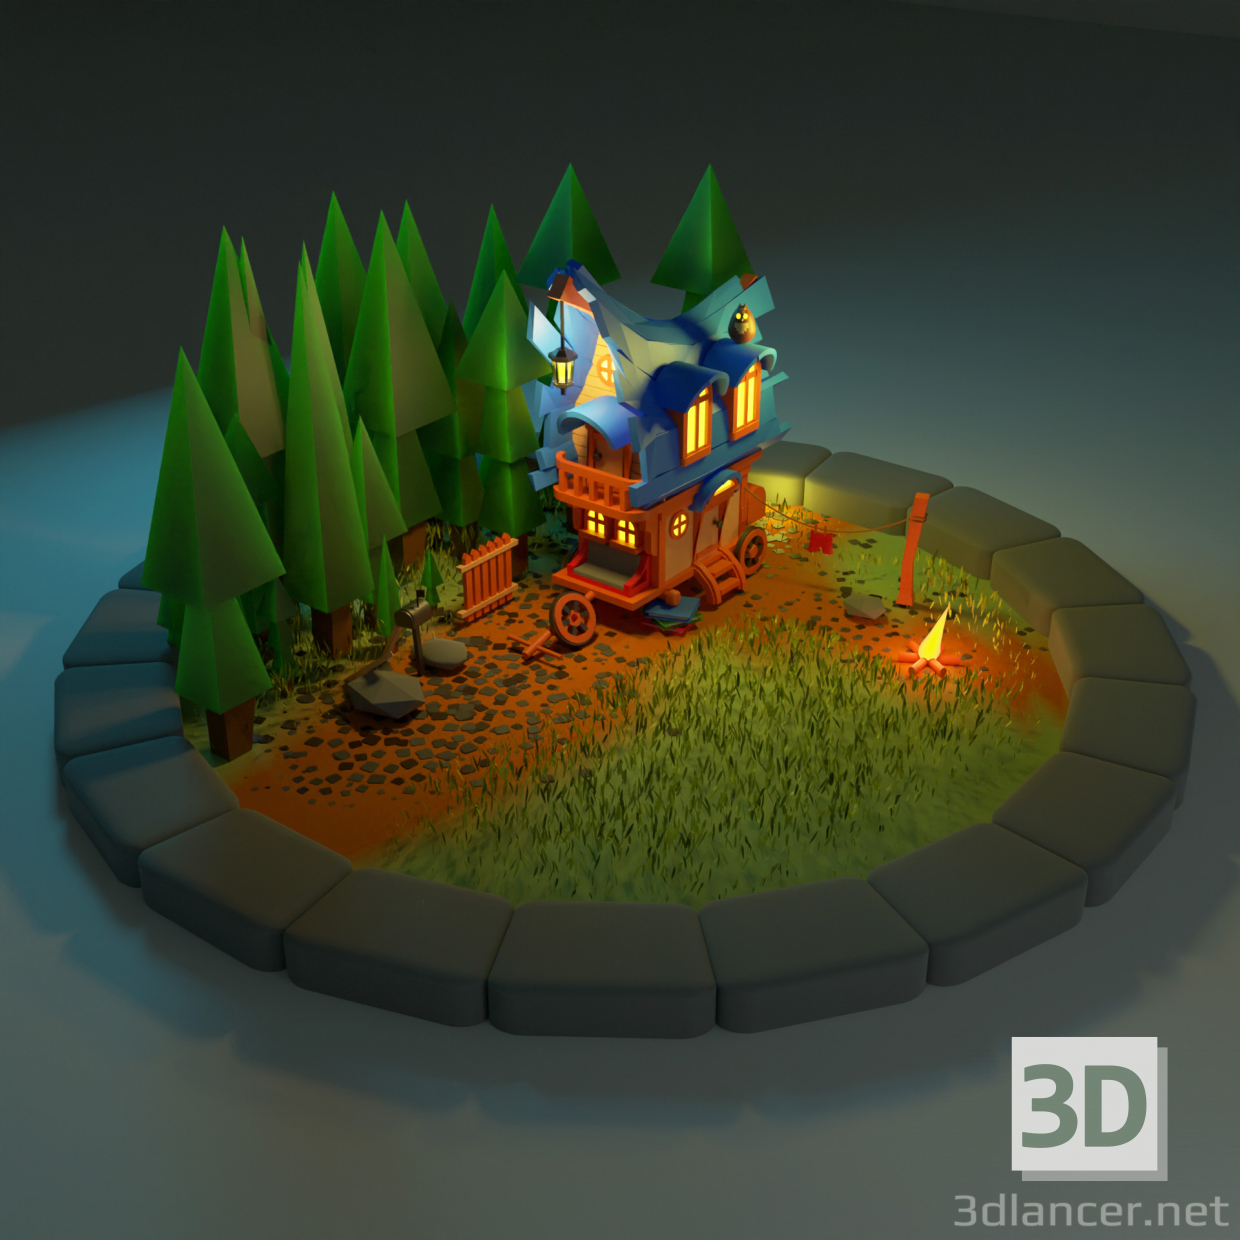 LOW-POLY-MODELL 3D-Modell kaufen - Rendern